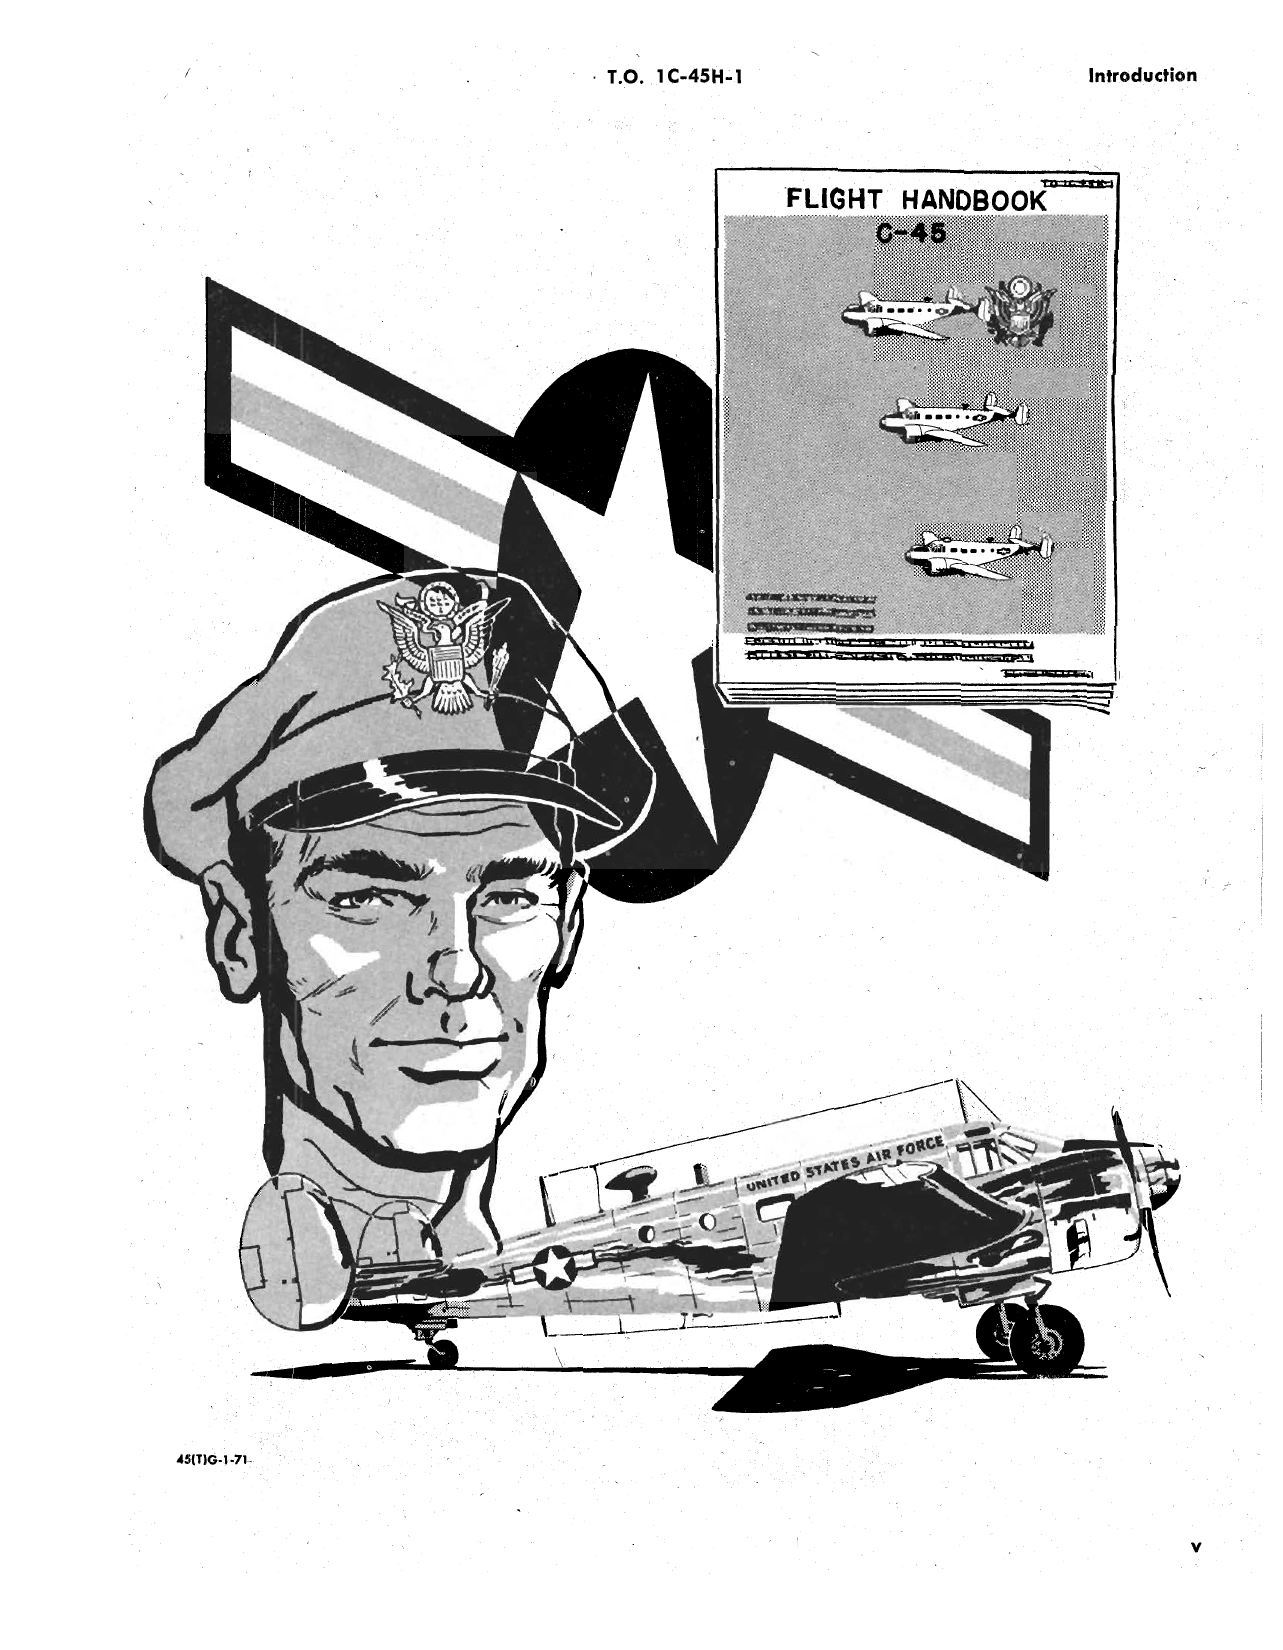 Sample page 7 from AirCorps Library document: Flight Handbook for C-45G, TC-45G, and C-45H Aircraft